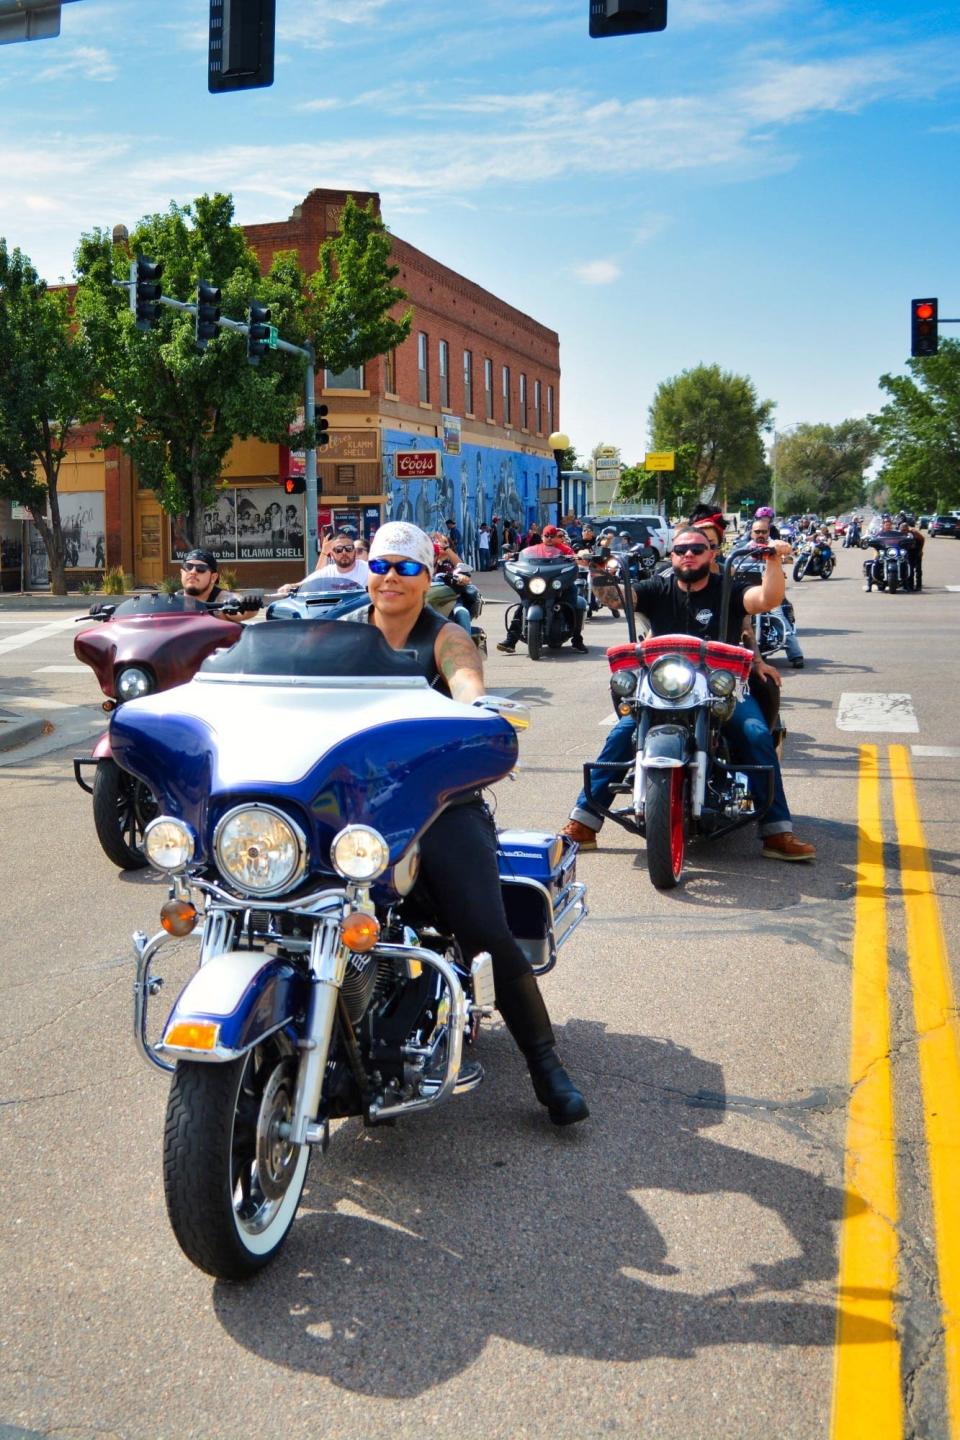 Motorcyclists take part in the Vialpando Vicla in 2021 to raise money for a scholarship fund set up in memory of Isaiah Vialpando, who was shot dead in Pueblo, Colo., in 2015.